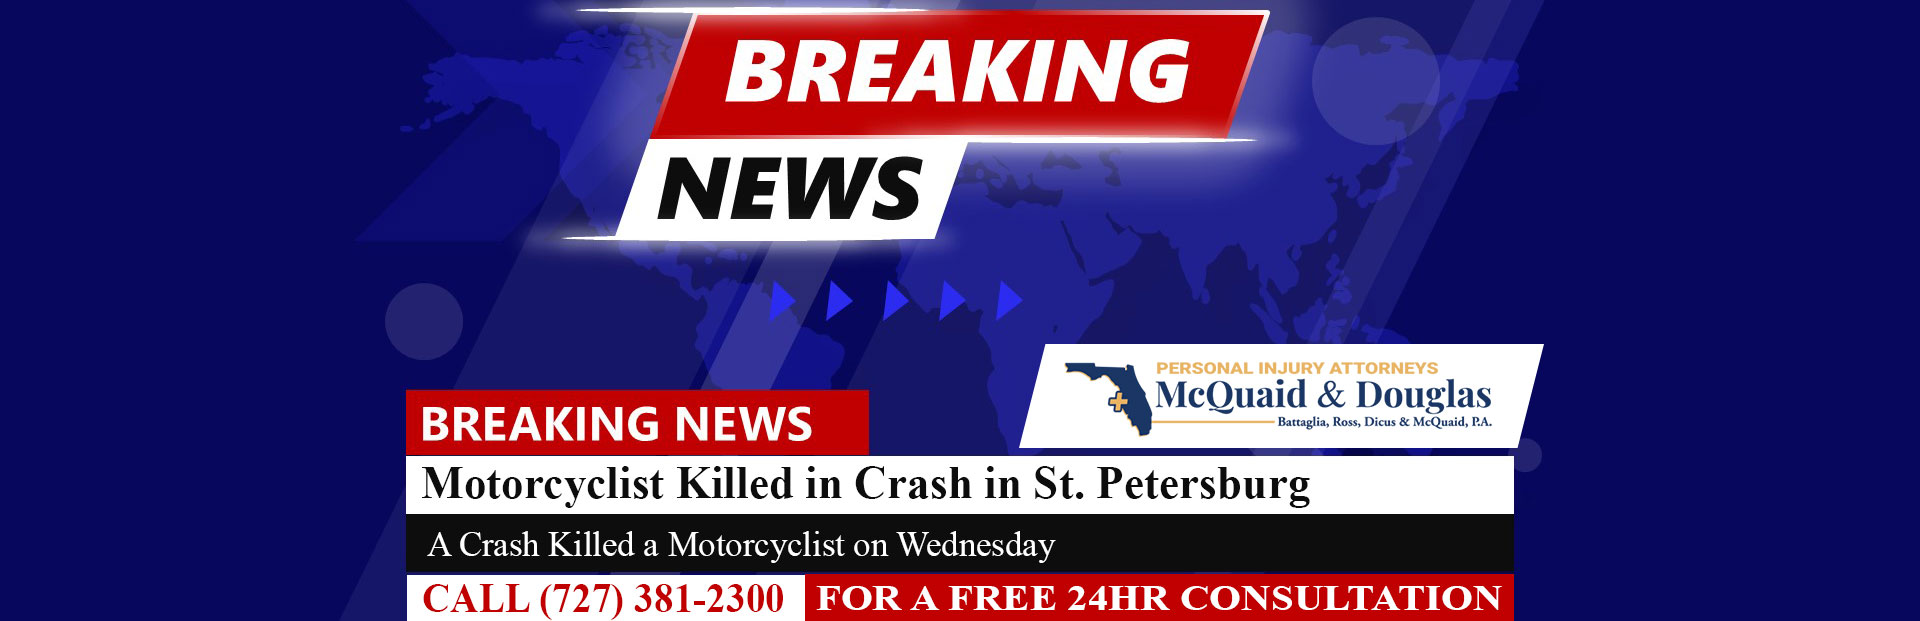 [12-08-22] Motorcyclist Killed in Crash on 1st Avenue in St. Petersburg